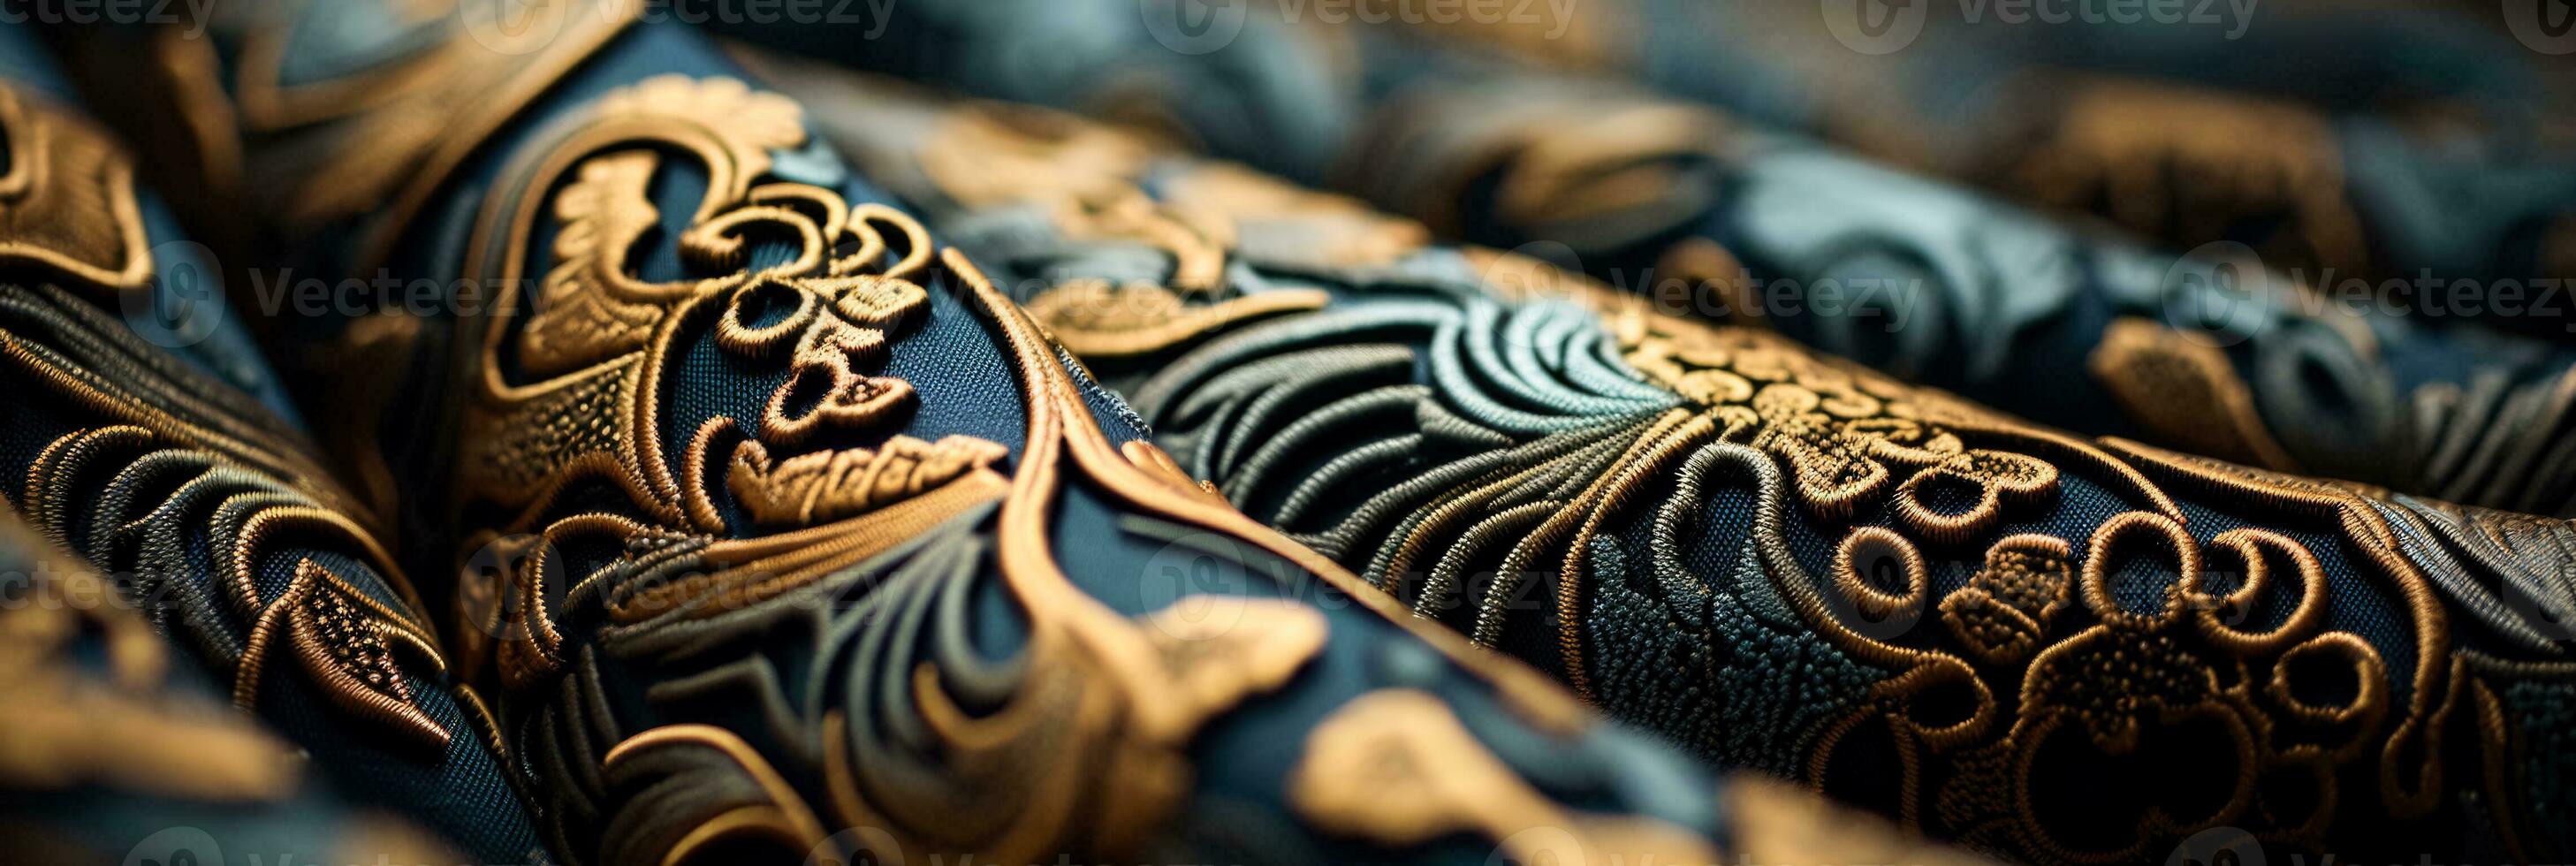 Intricate woven patterns of Jacquard fabric captured in detailed close up photo